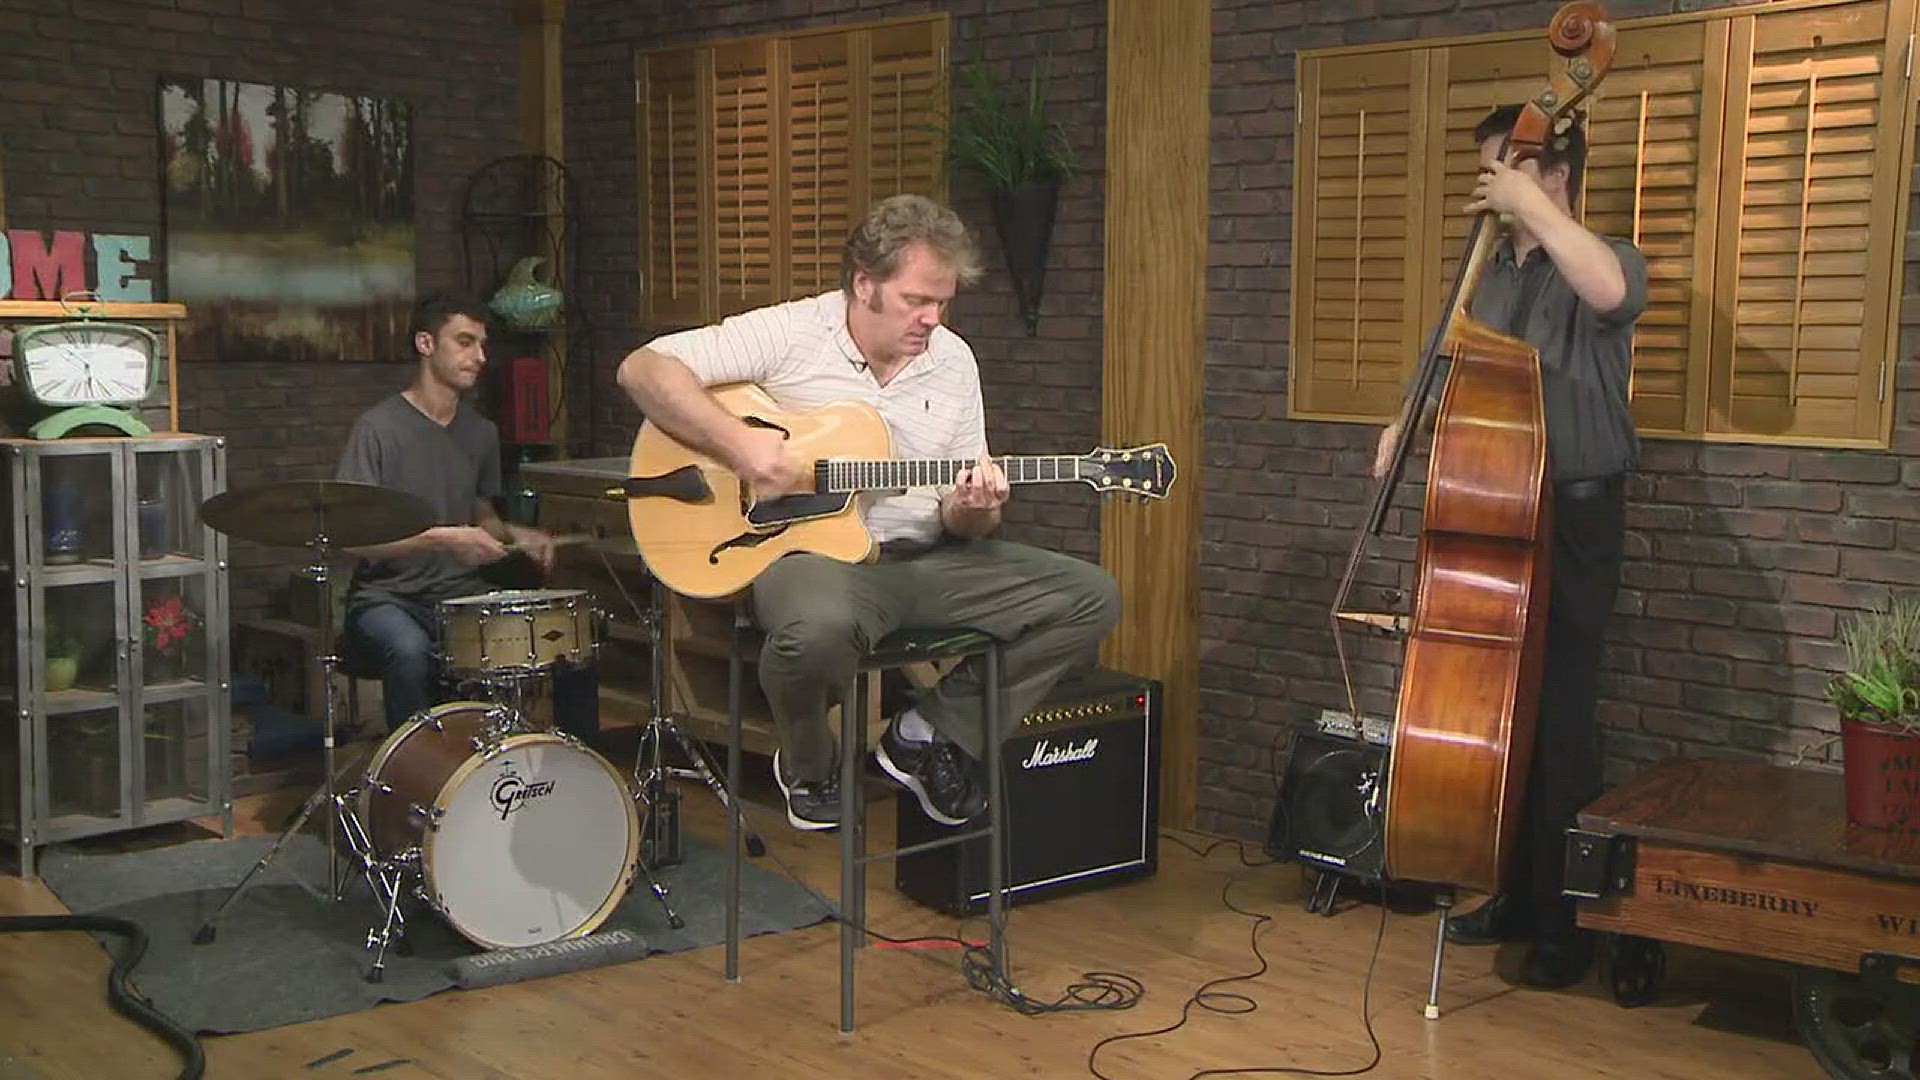 The Matt Treadway Trio joined THV11 This Morning to play us some jazz to warm up for their Thursday performance at the Ohio Club